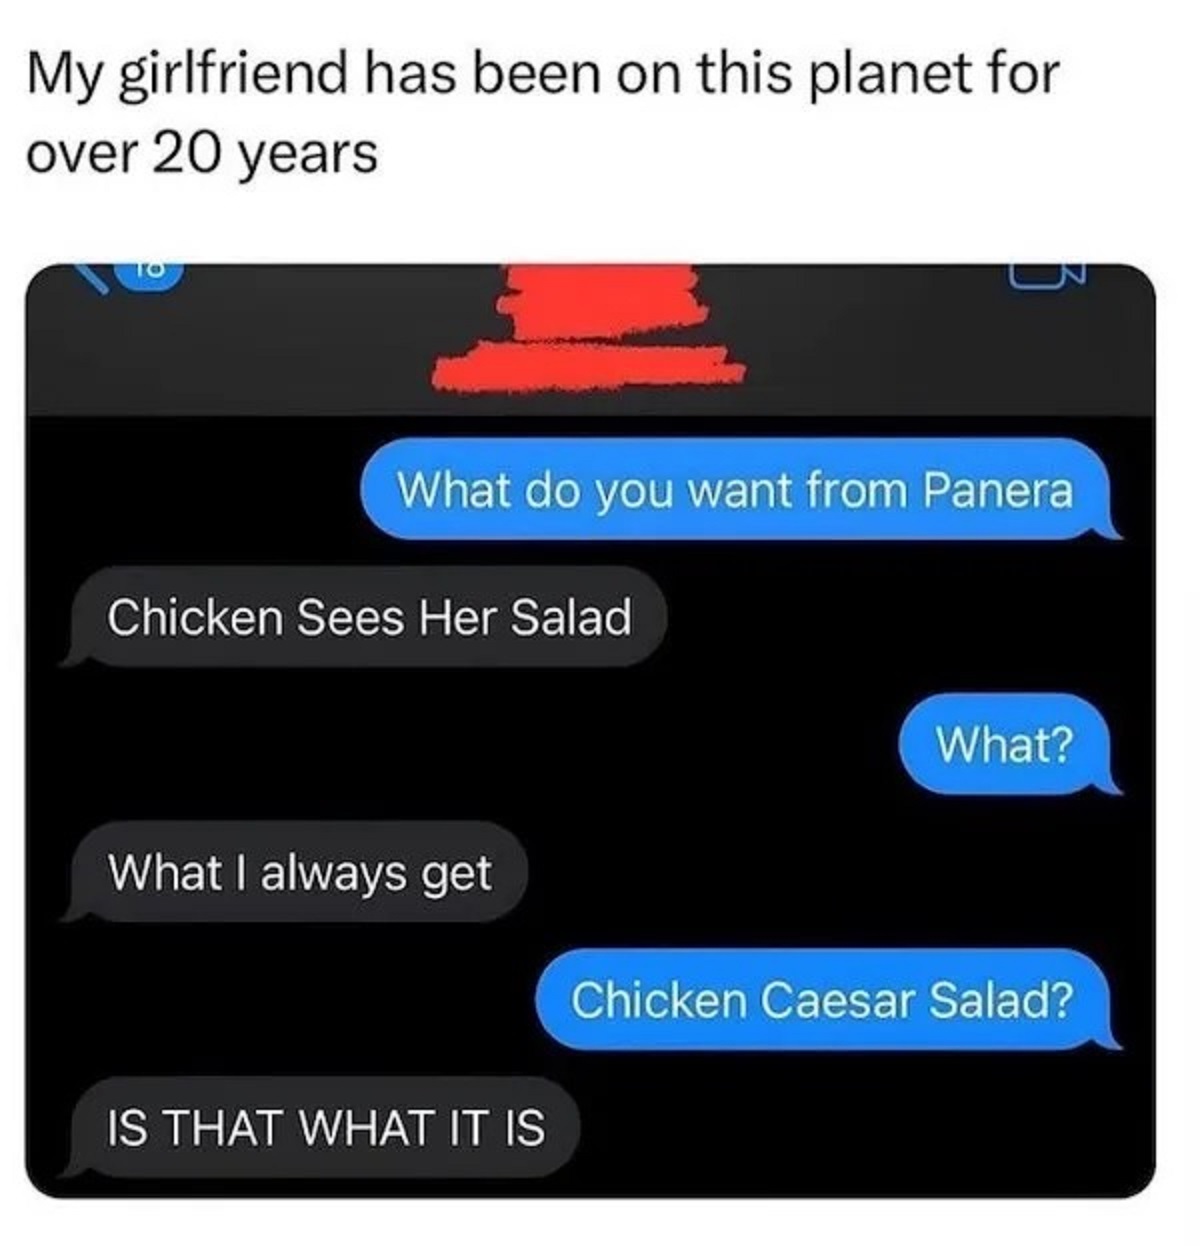 screenshot - My girlfriend has been on this planet for over 20 years What do you want from Panera Chicken Sees Her Salad What I always get What? Is That What It Is Chicken Caesar Salad?